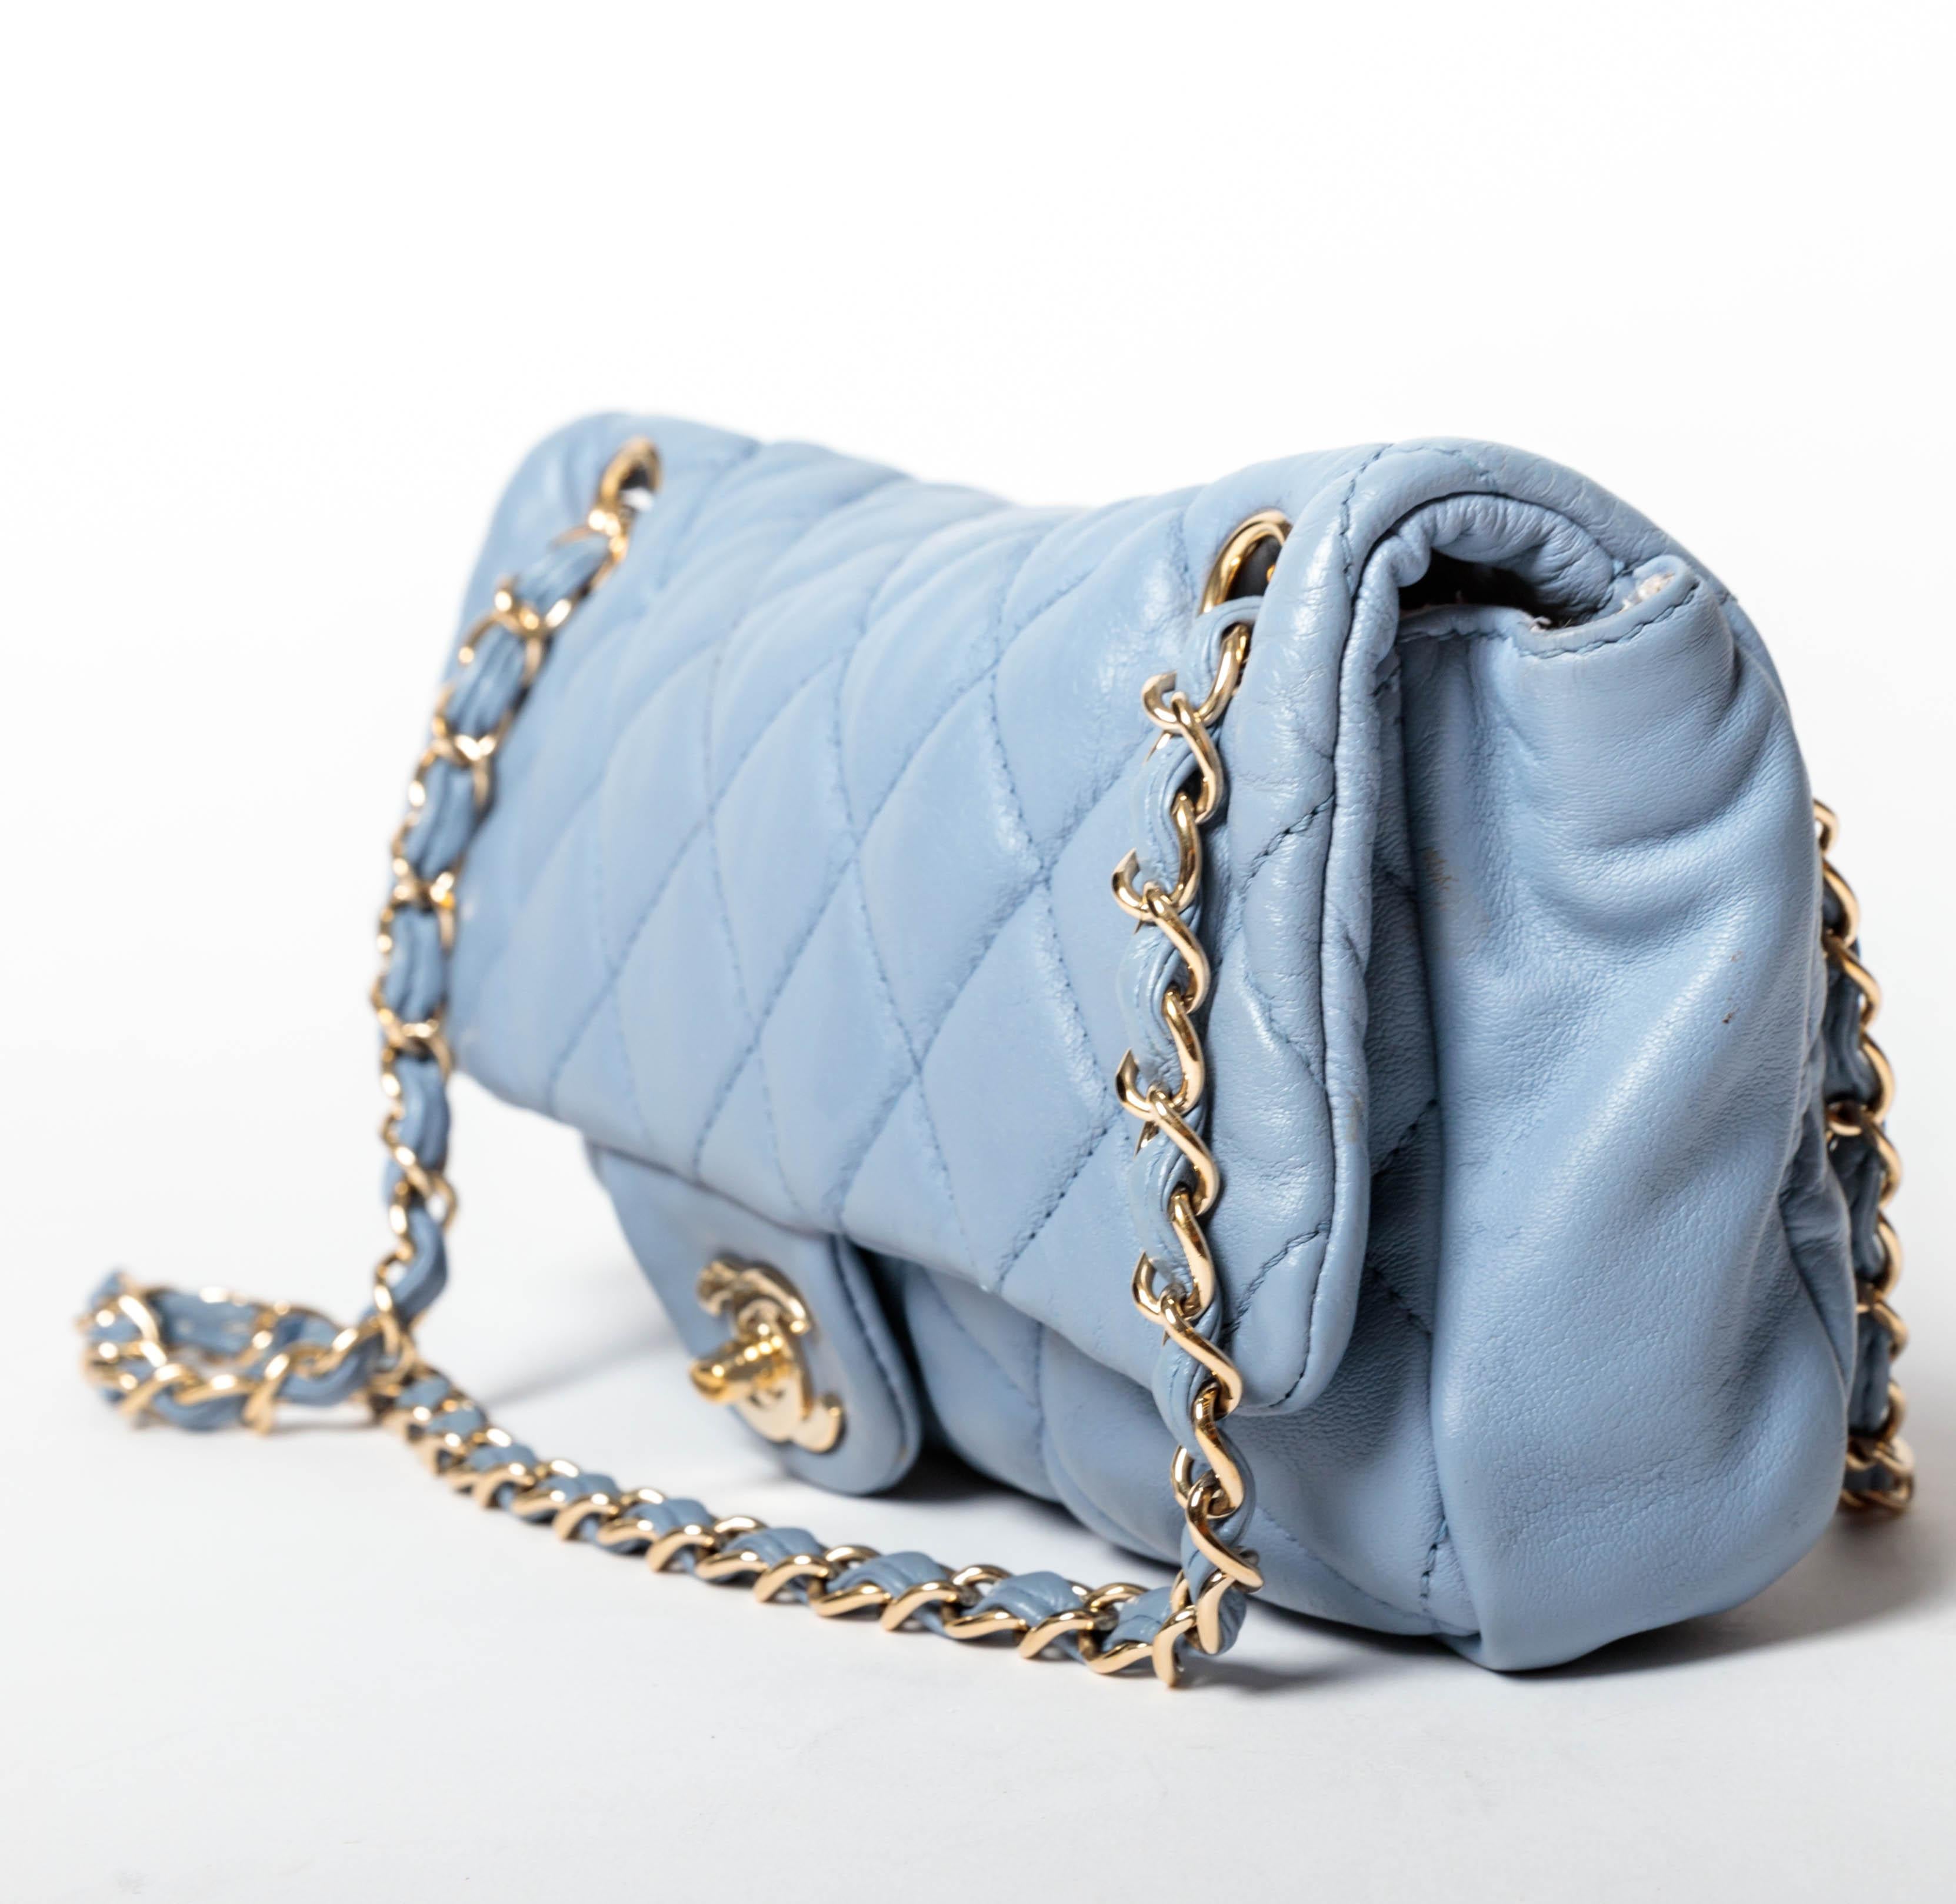 Chanel Powder Blue Single Flap with Gold Hardware - 2005 - 2006 Collection For Sale 1